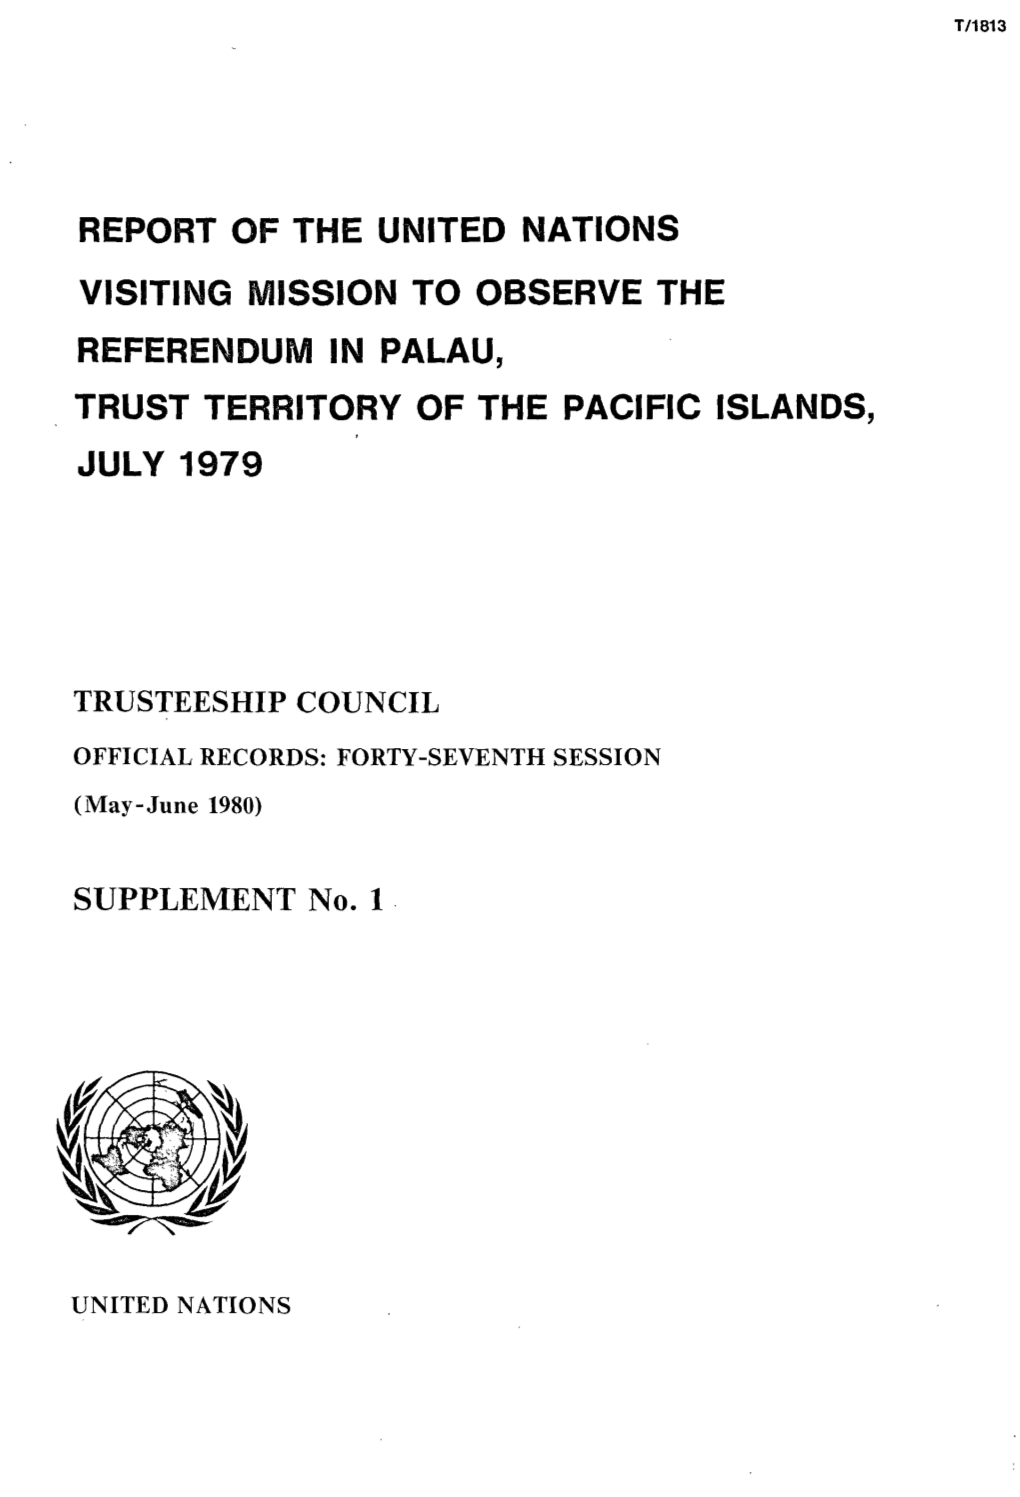 Report of the United Nations Visiting Mission to Observe the Referendum in Palau